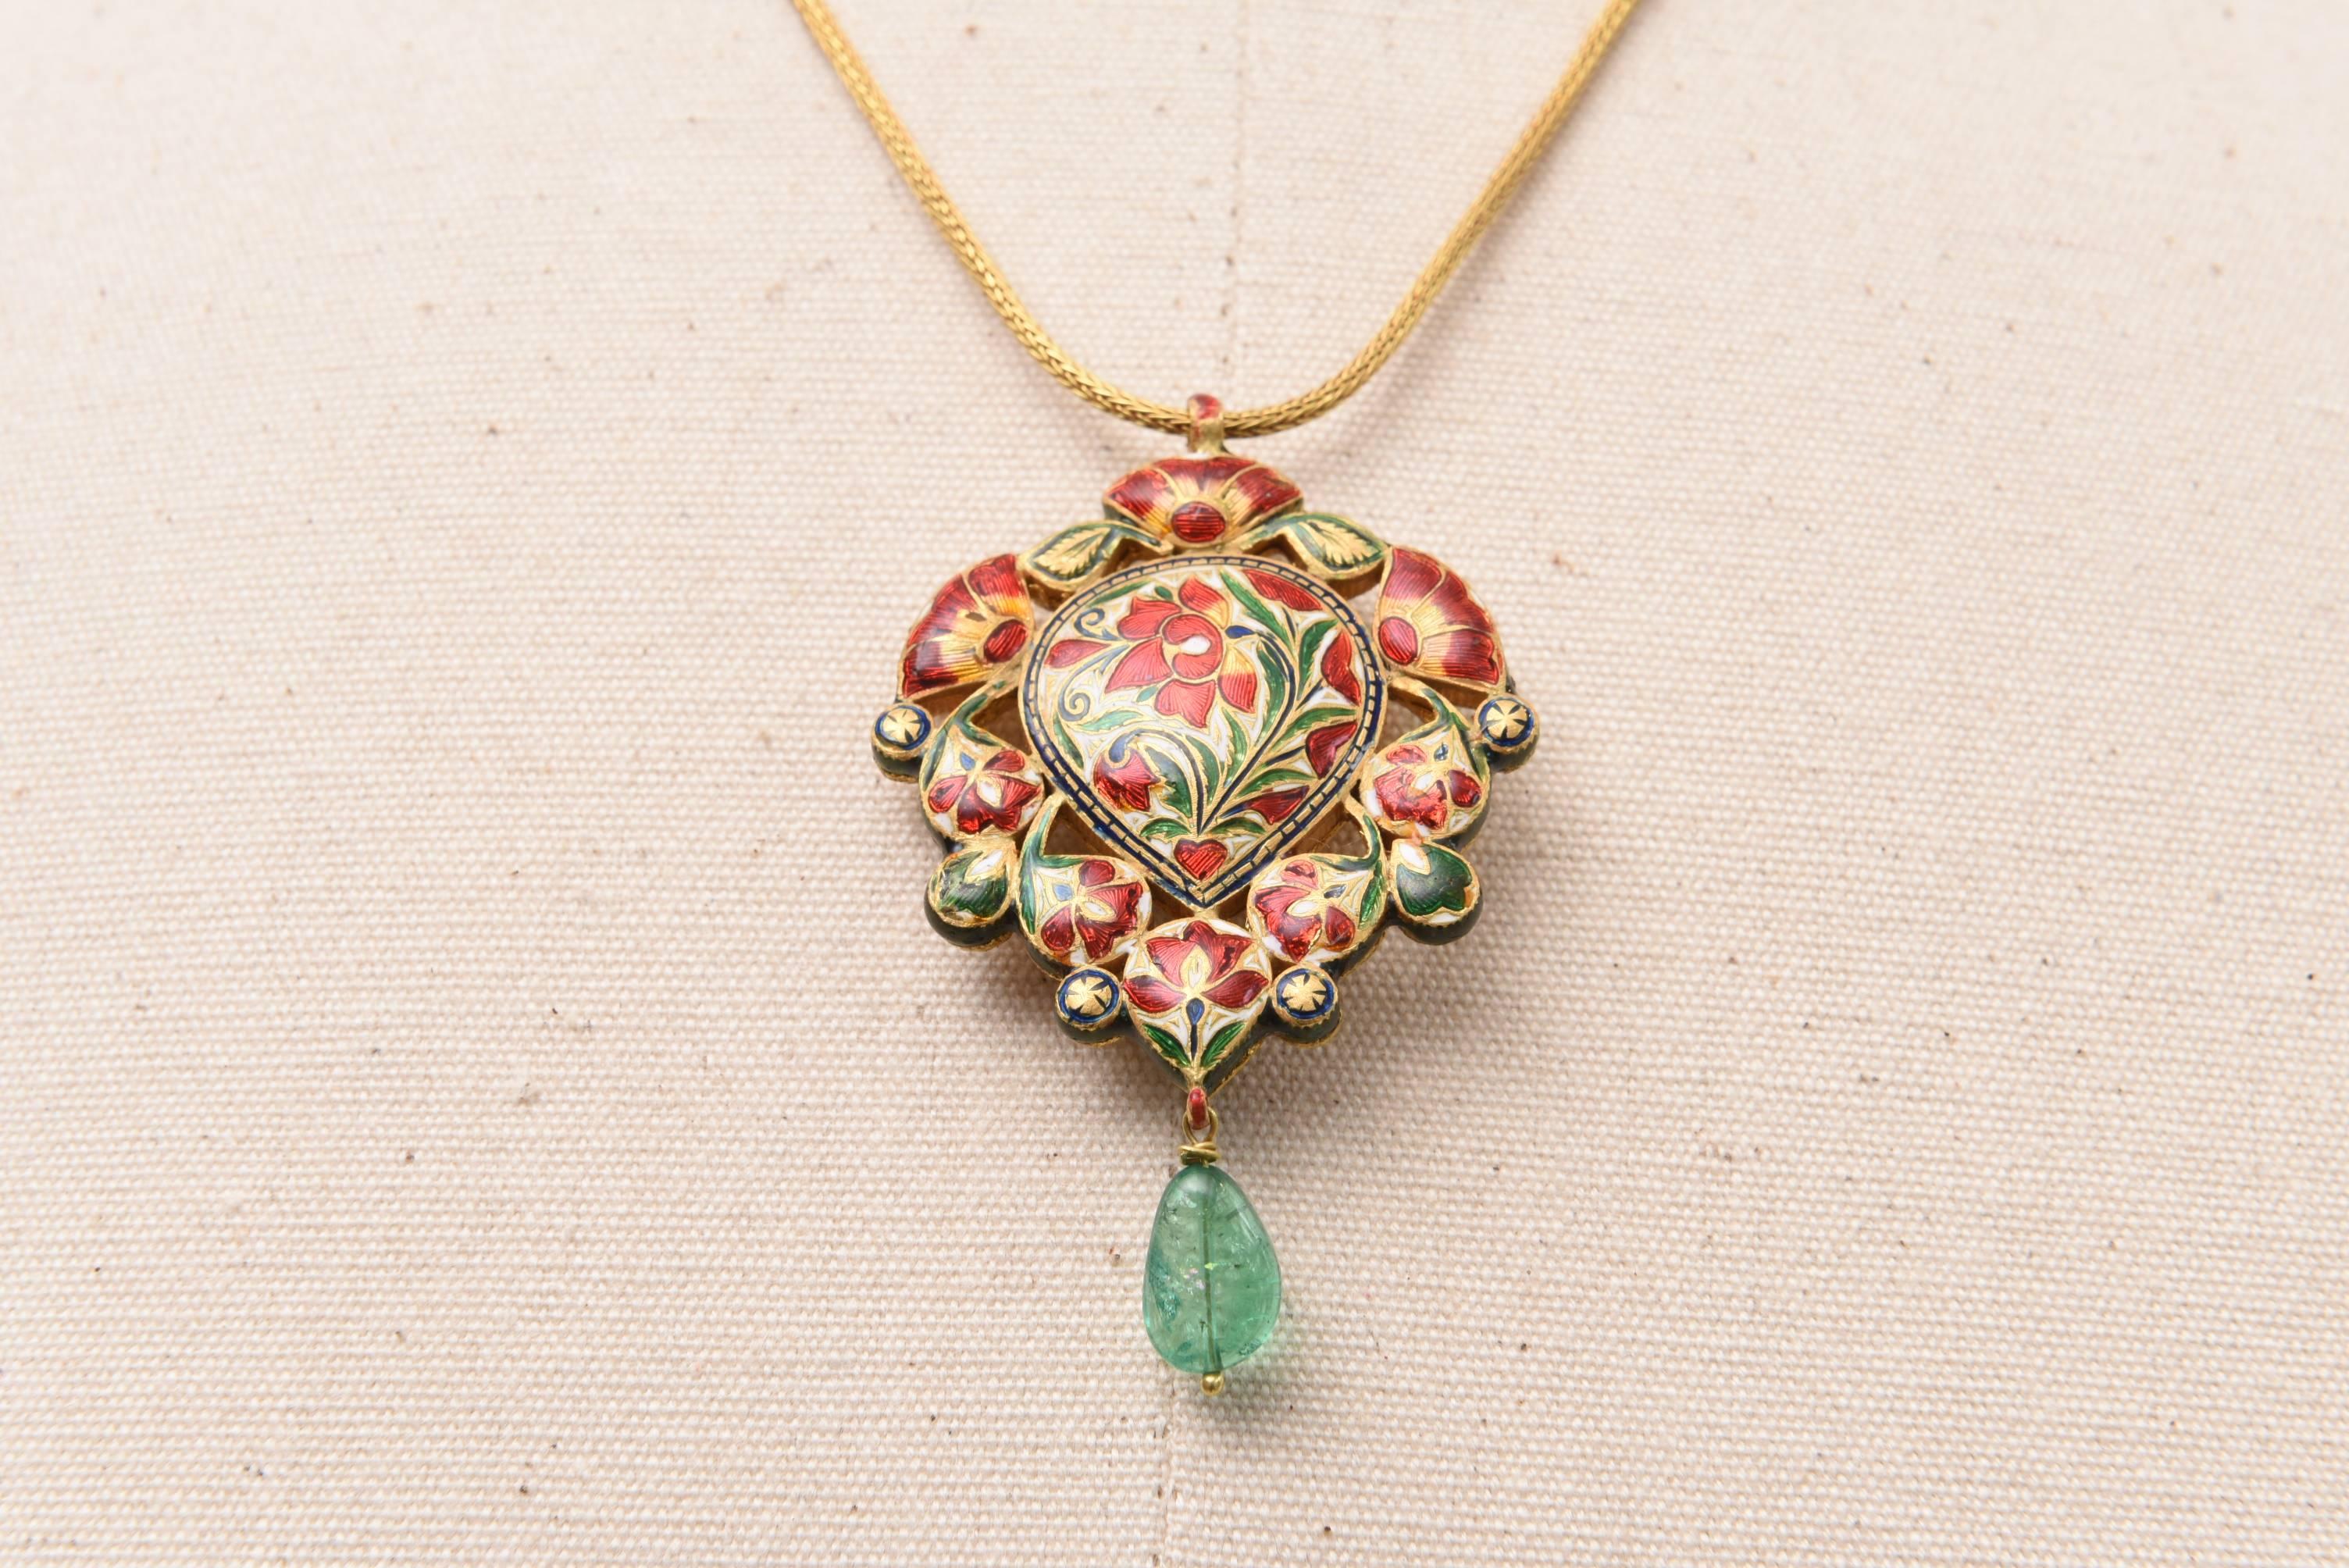 This magnificent pendant represents the Nava Ratna (see below) with precious and semi-precious stones set in 22K gold, and rosecut diamonds encircling the pear-shaped cabochon ruby in the center.  Blue enamel along the outer edge and intricate